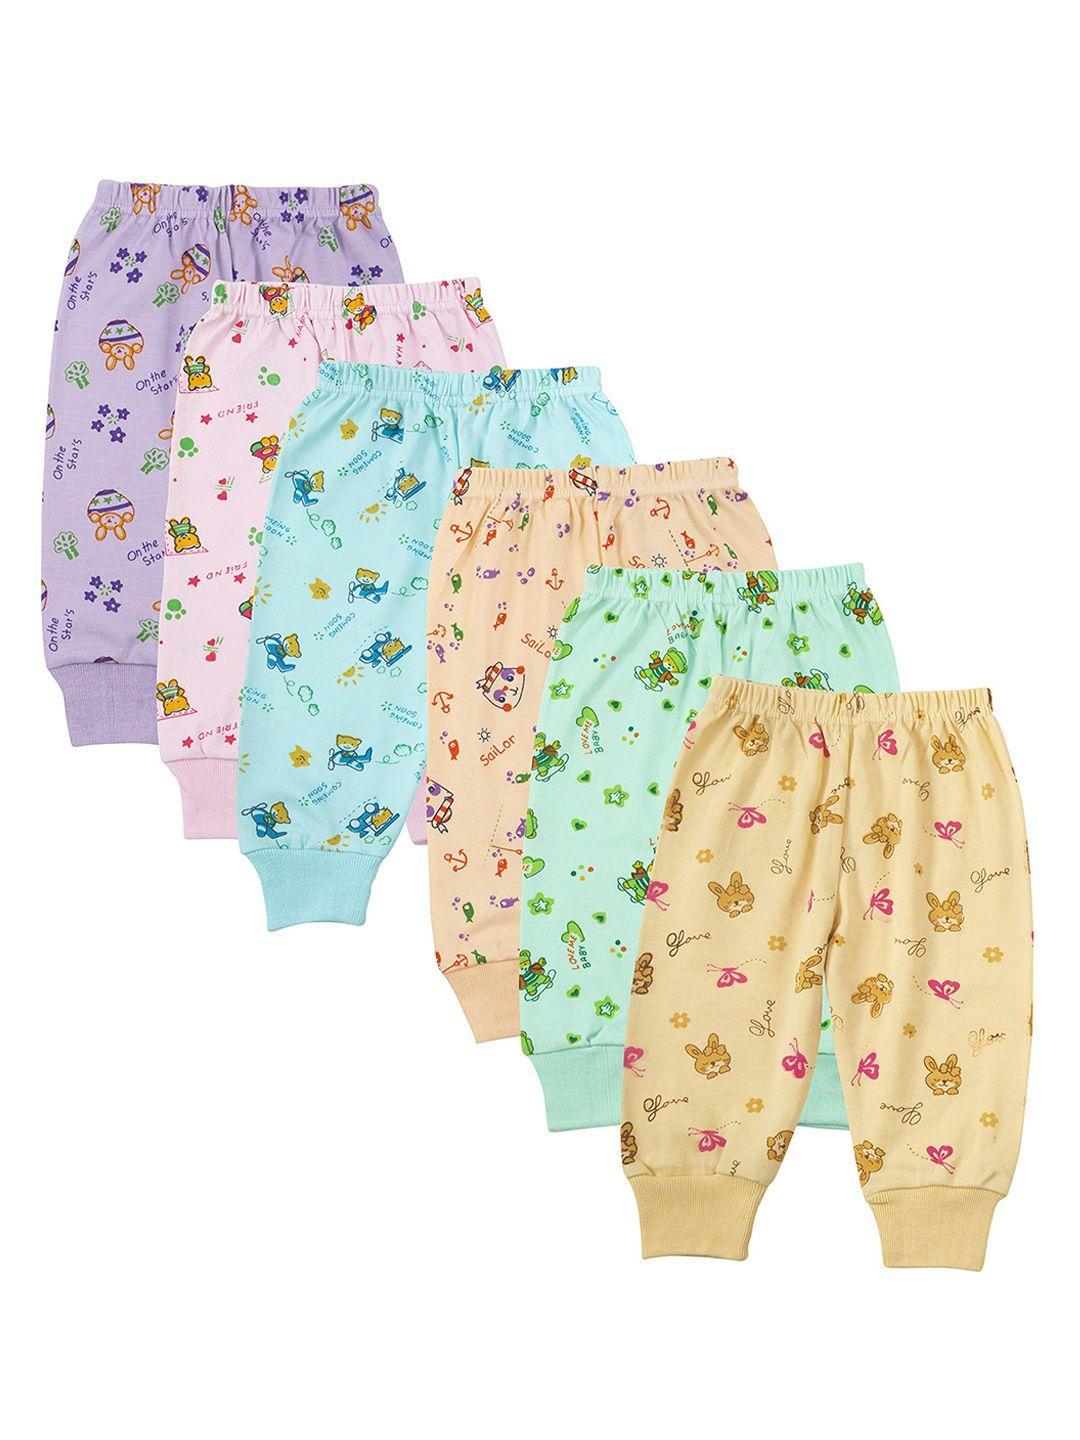 dowin kids pack of 6 printed cotton track pants